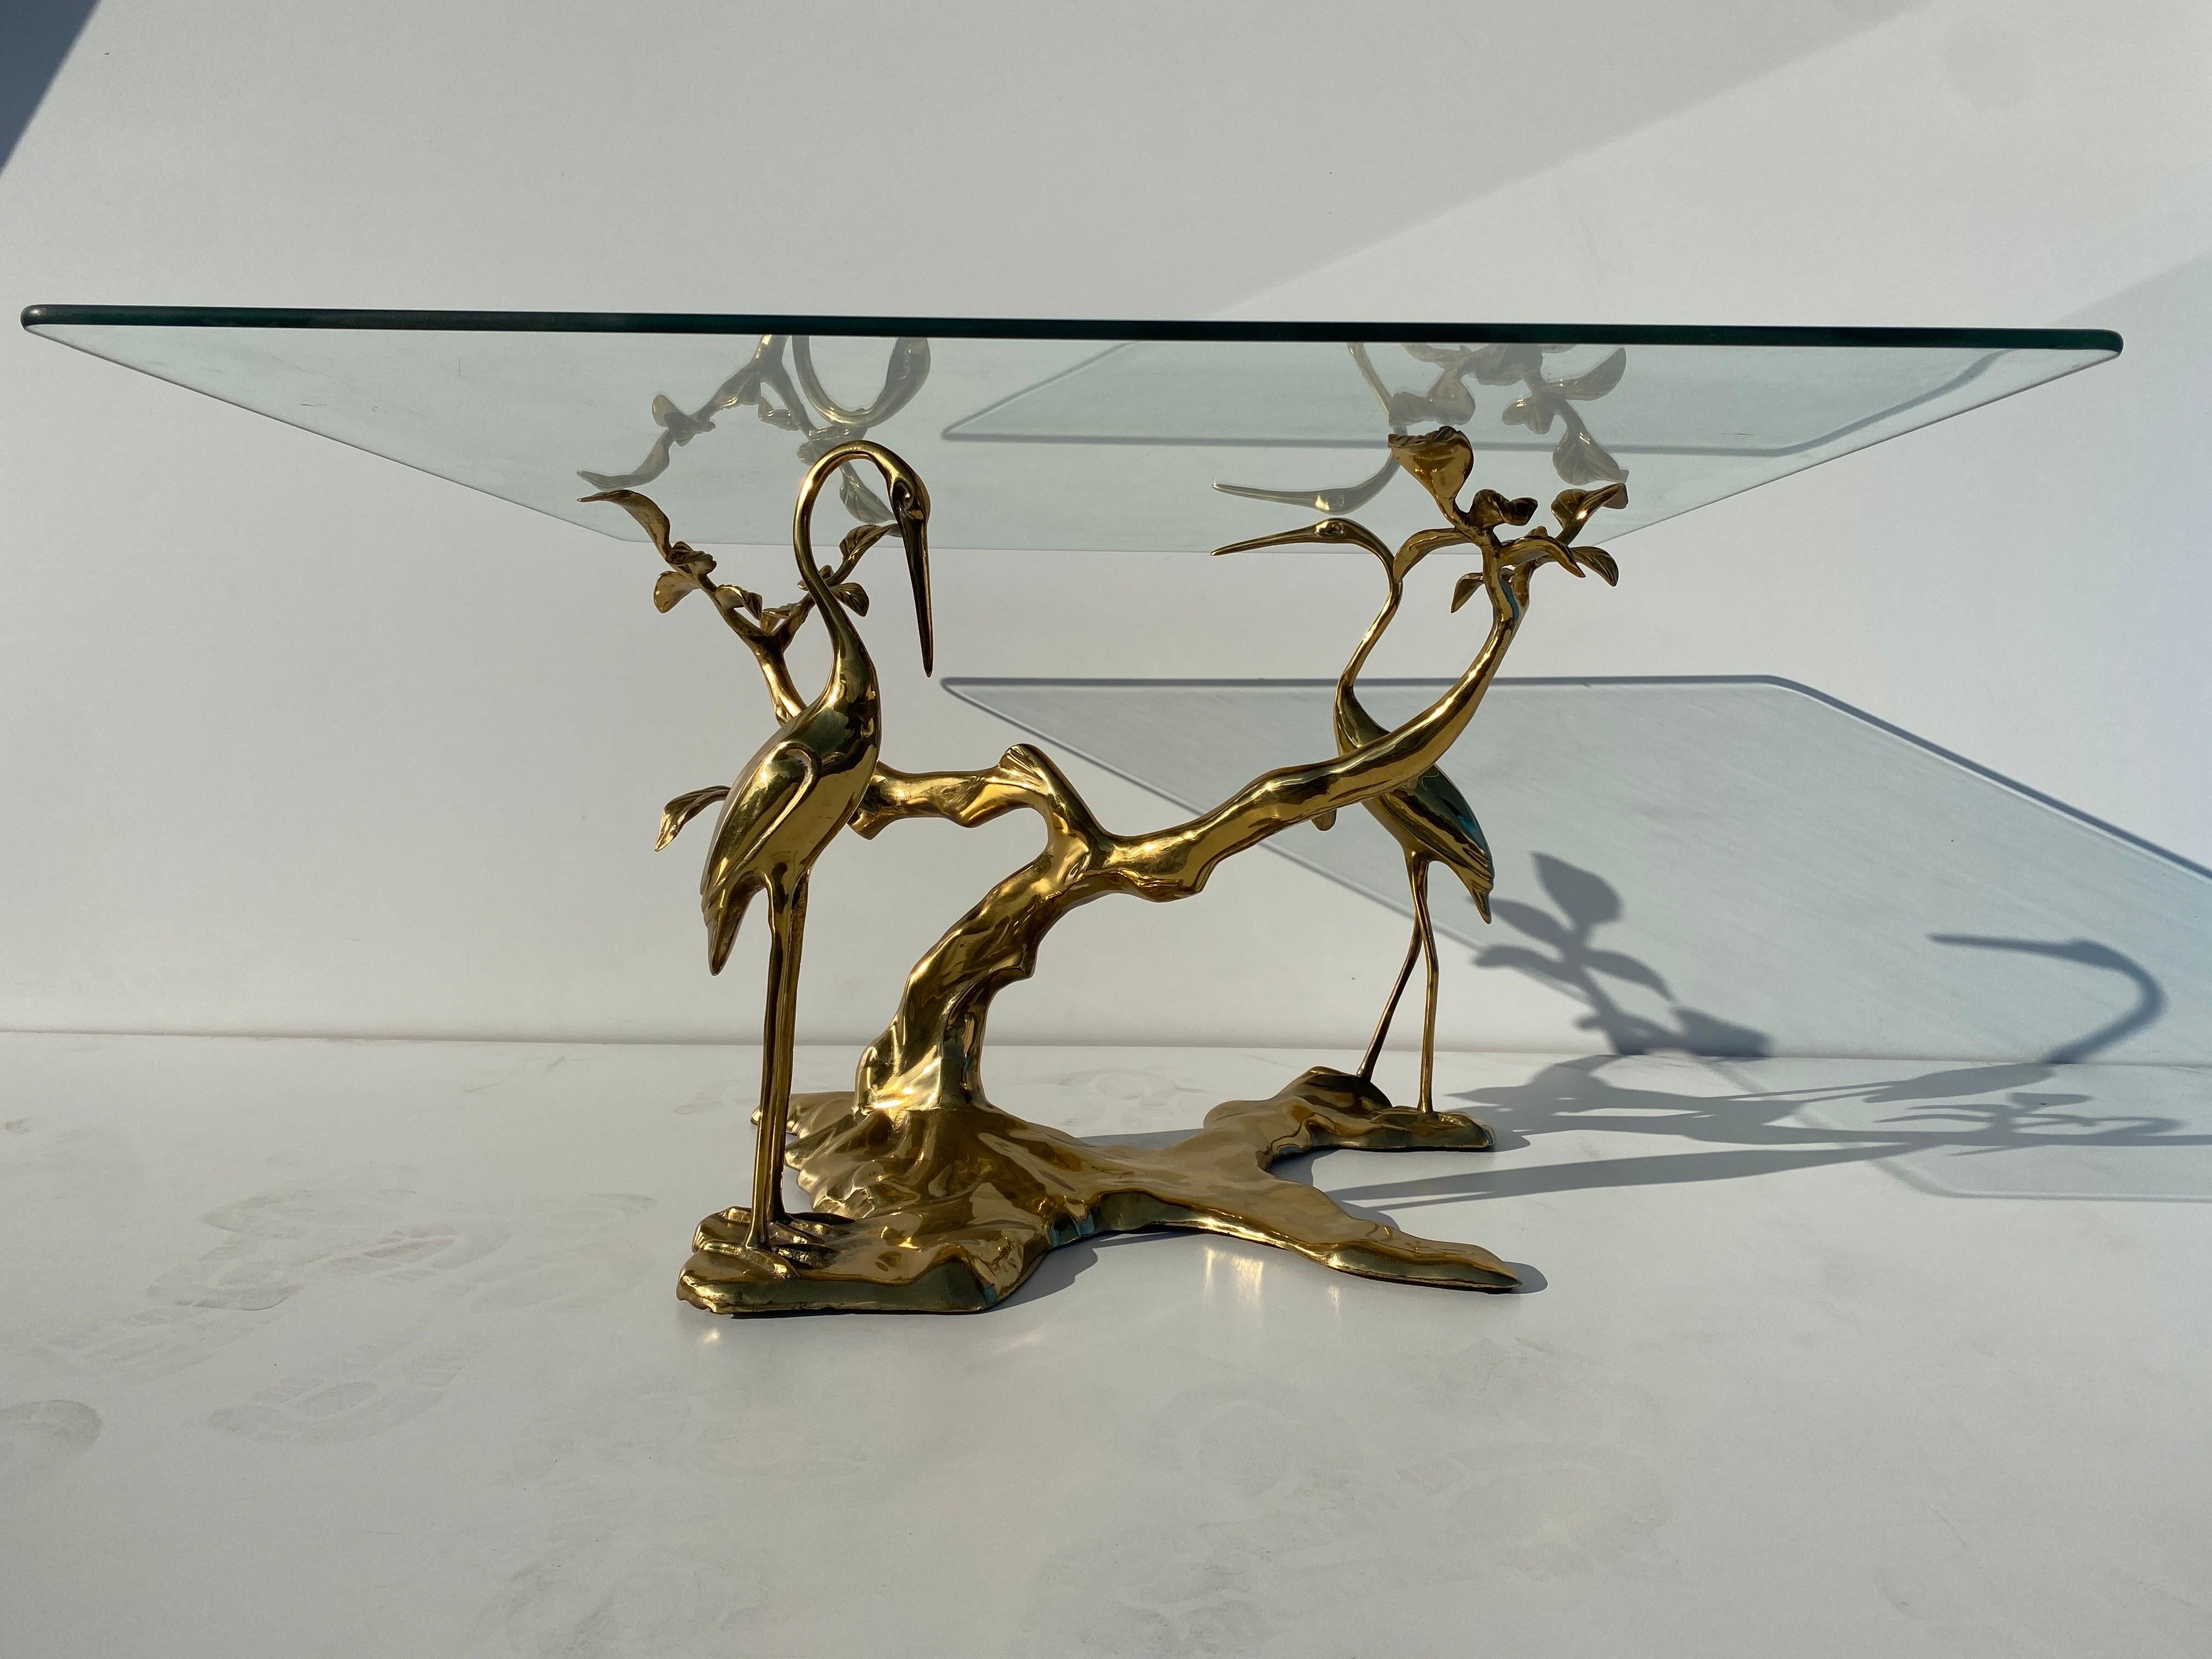 Brass bonsai tree and cranes coffee / side table in the manner of Willy Daro. Glass shown is 33” x 33” by 3/8” thick and not included. Table base will hold larger and heavier glass top in round or rectangular shape. We have two tables available.